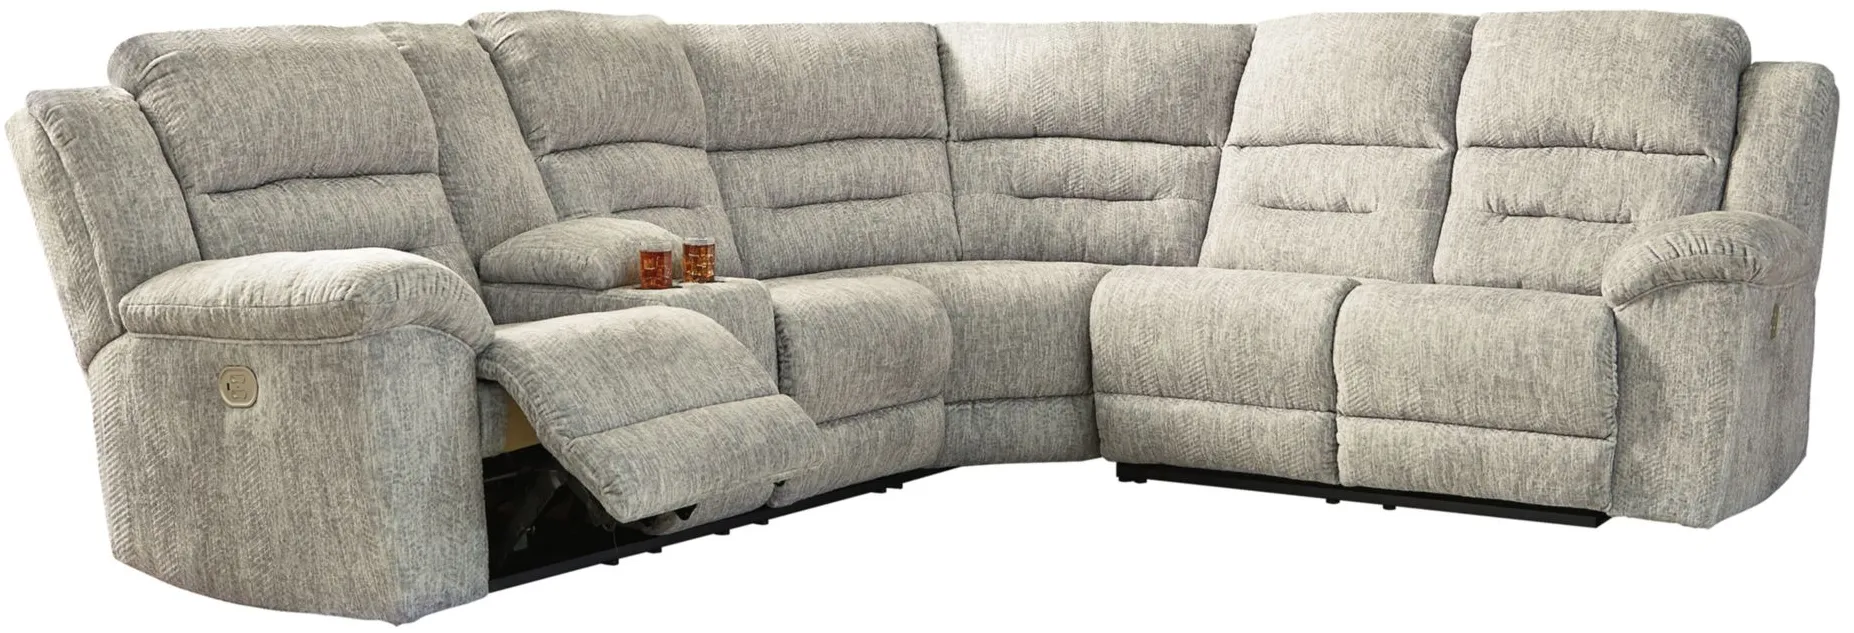 Family Den 3-pc. Power Reclining Sectional in Pewter by Ashley Furniture